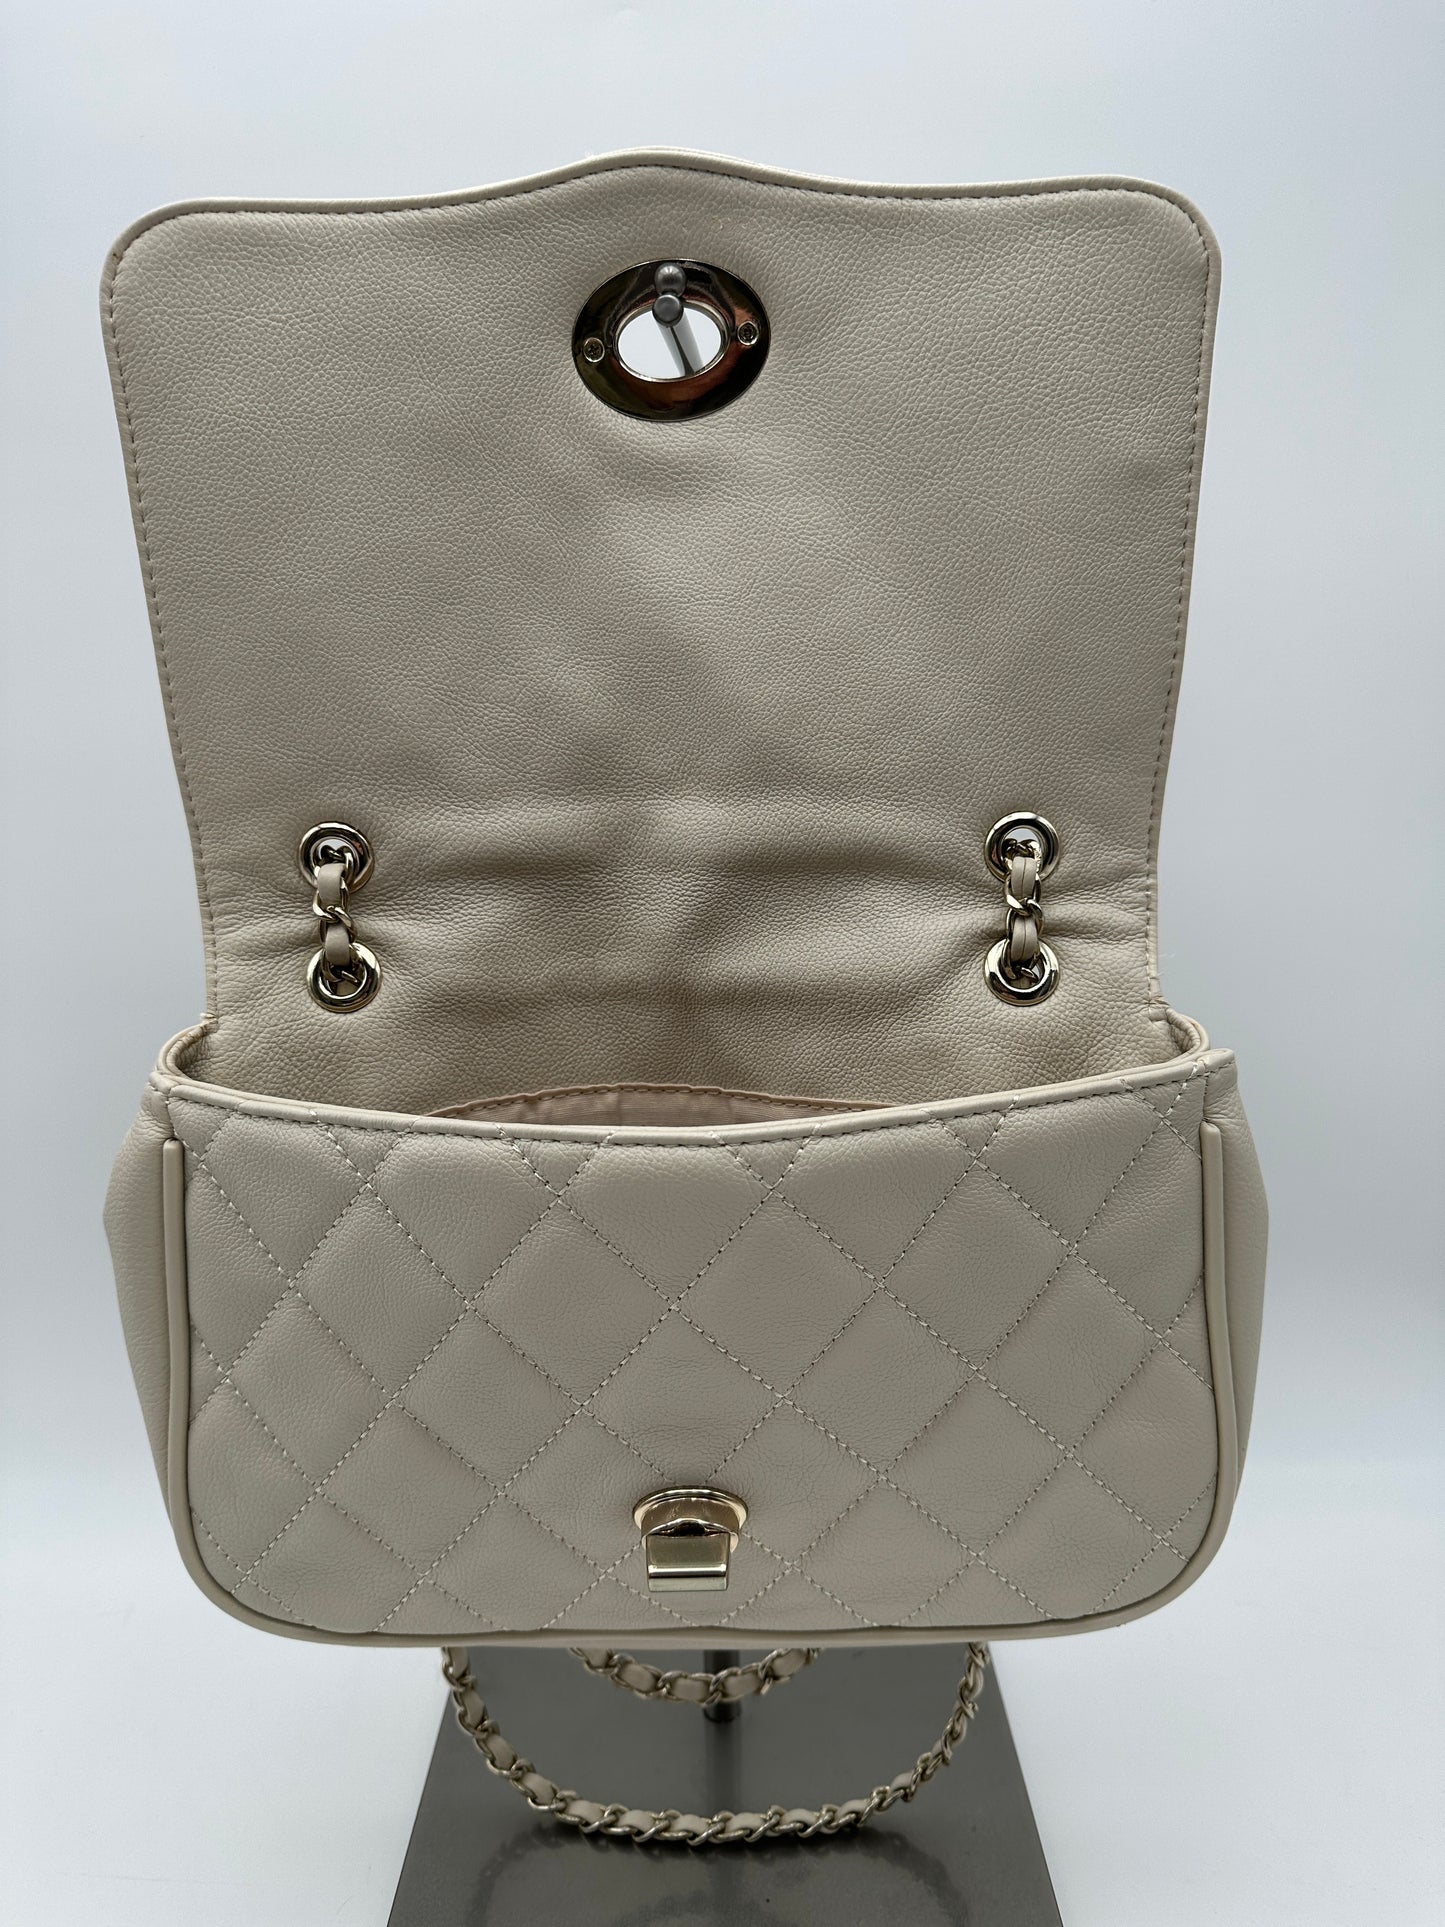 Aldo Off White Quilted Handbag Purse with Fold Over Flap and Chain Handle Strap